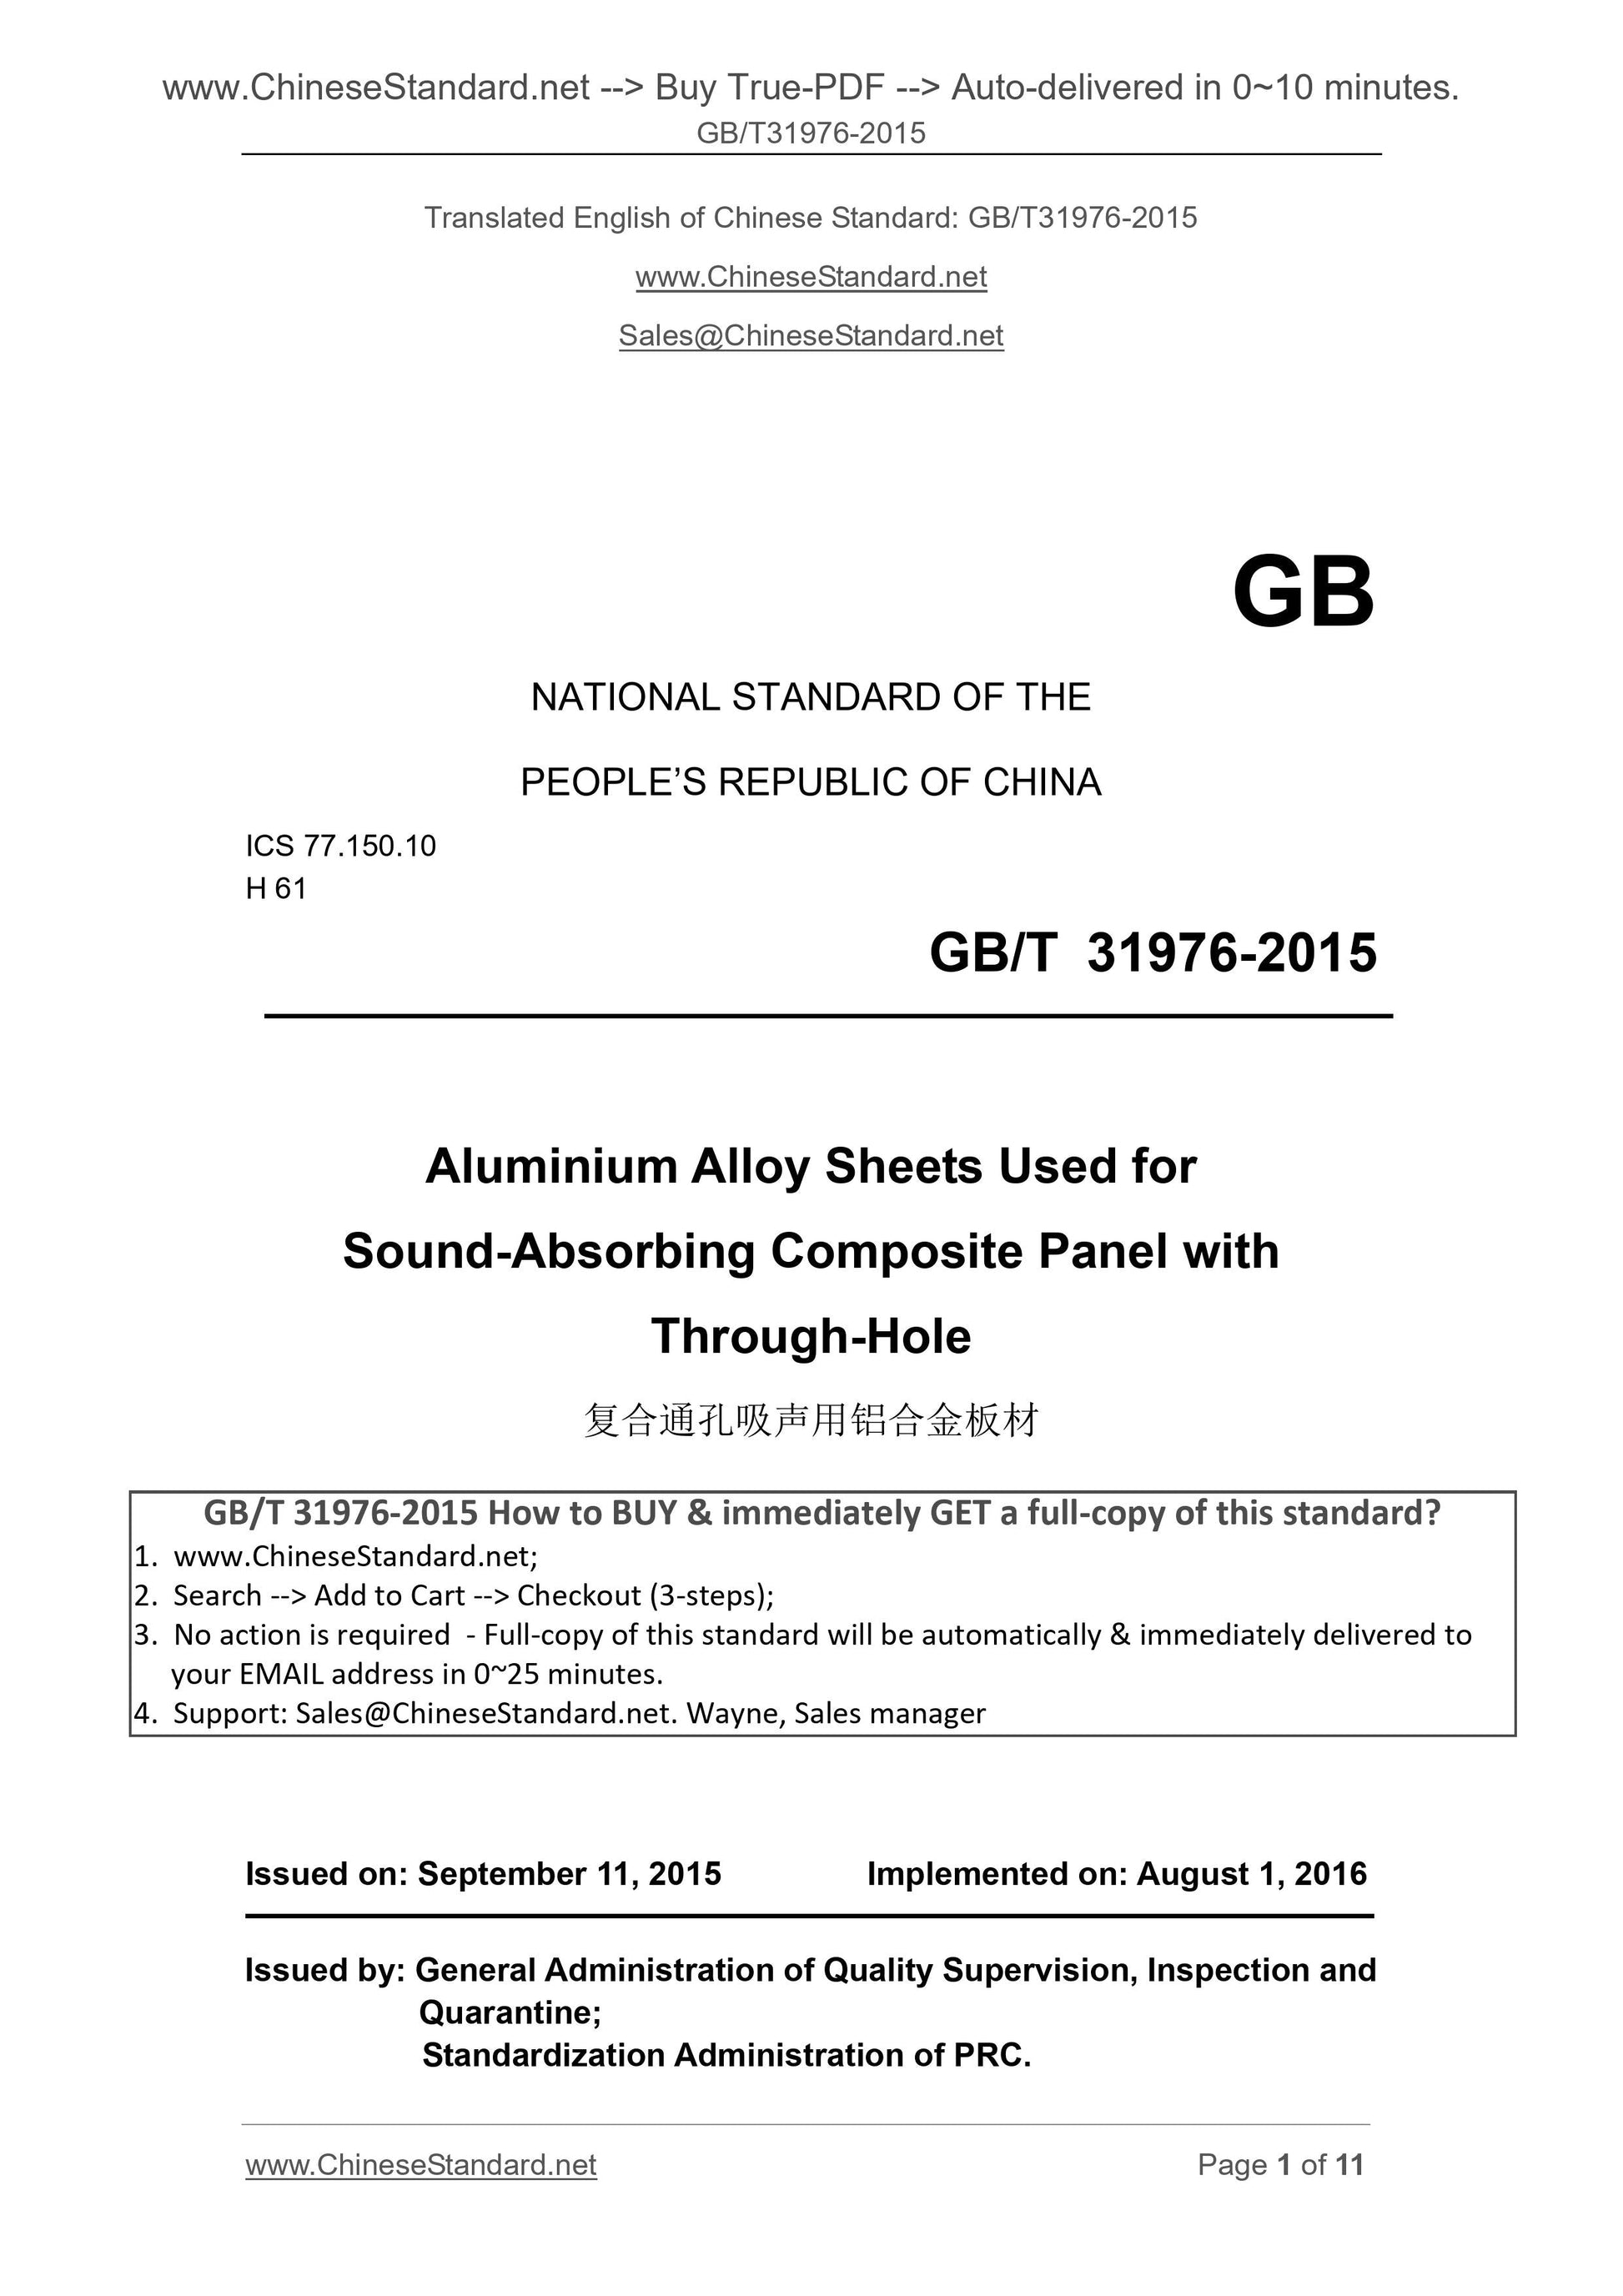 GB/T 31976-2015 Page 1